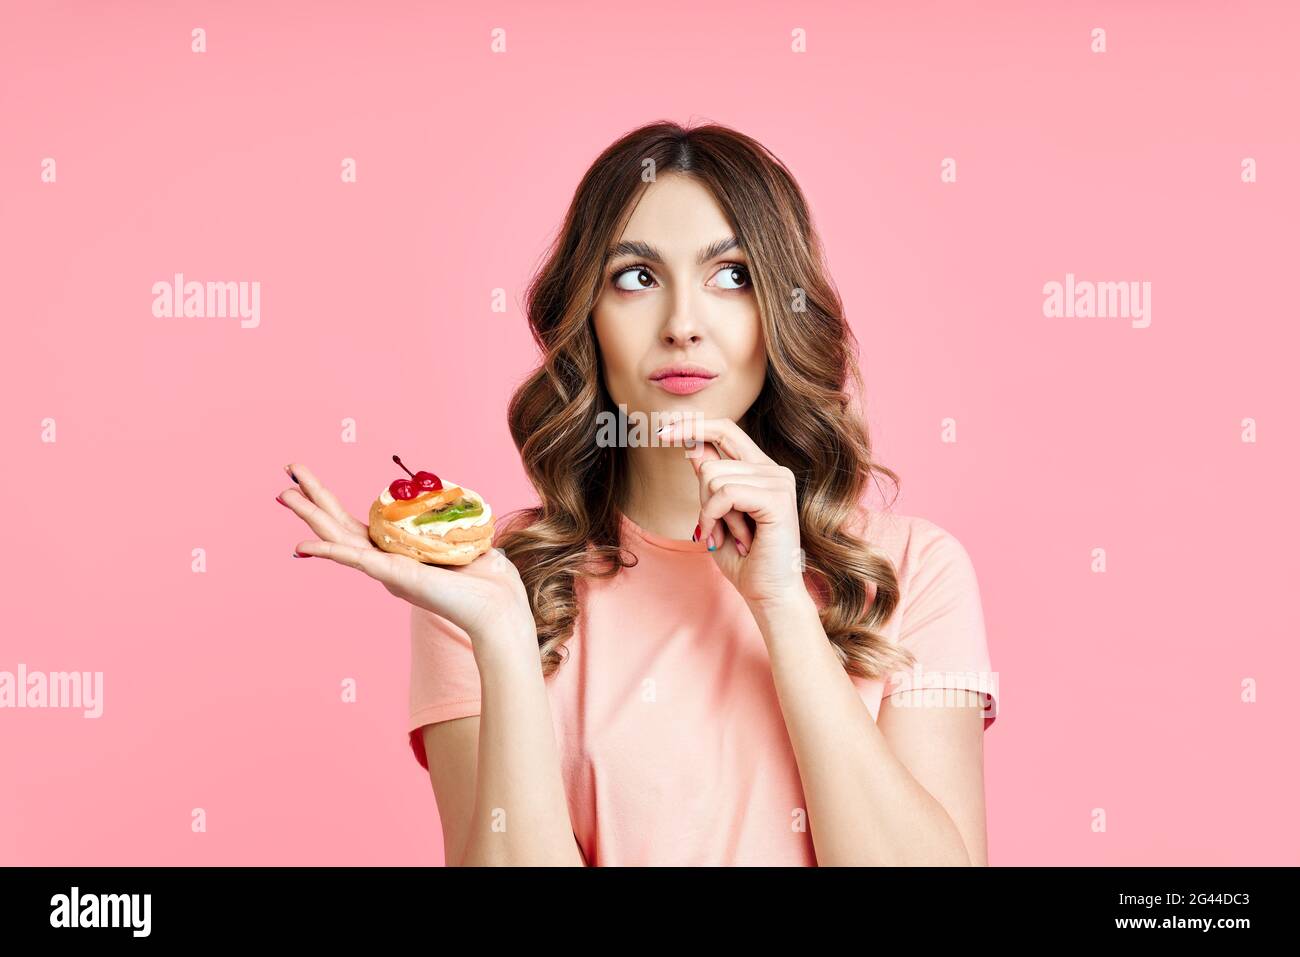 Dieting concept, confused pretty woman looking up holding pastry cake in hand Stock Photo